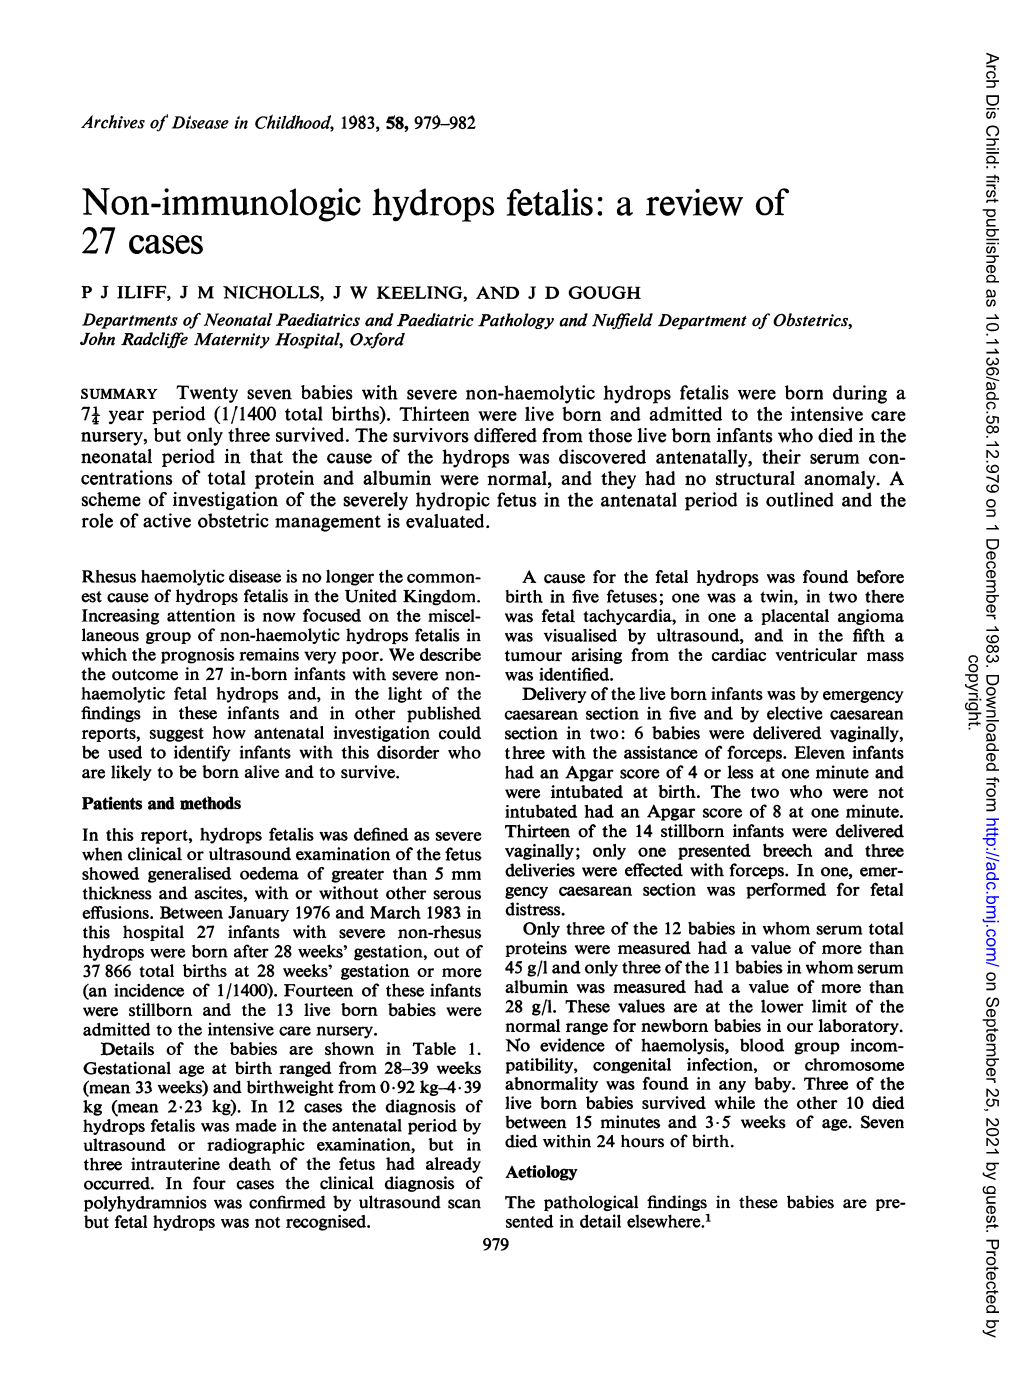 Non-Immunologic Hydrops Fetalis: a Review of 27 Cases